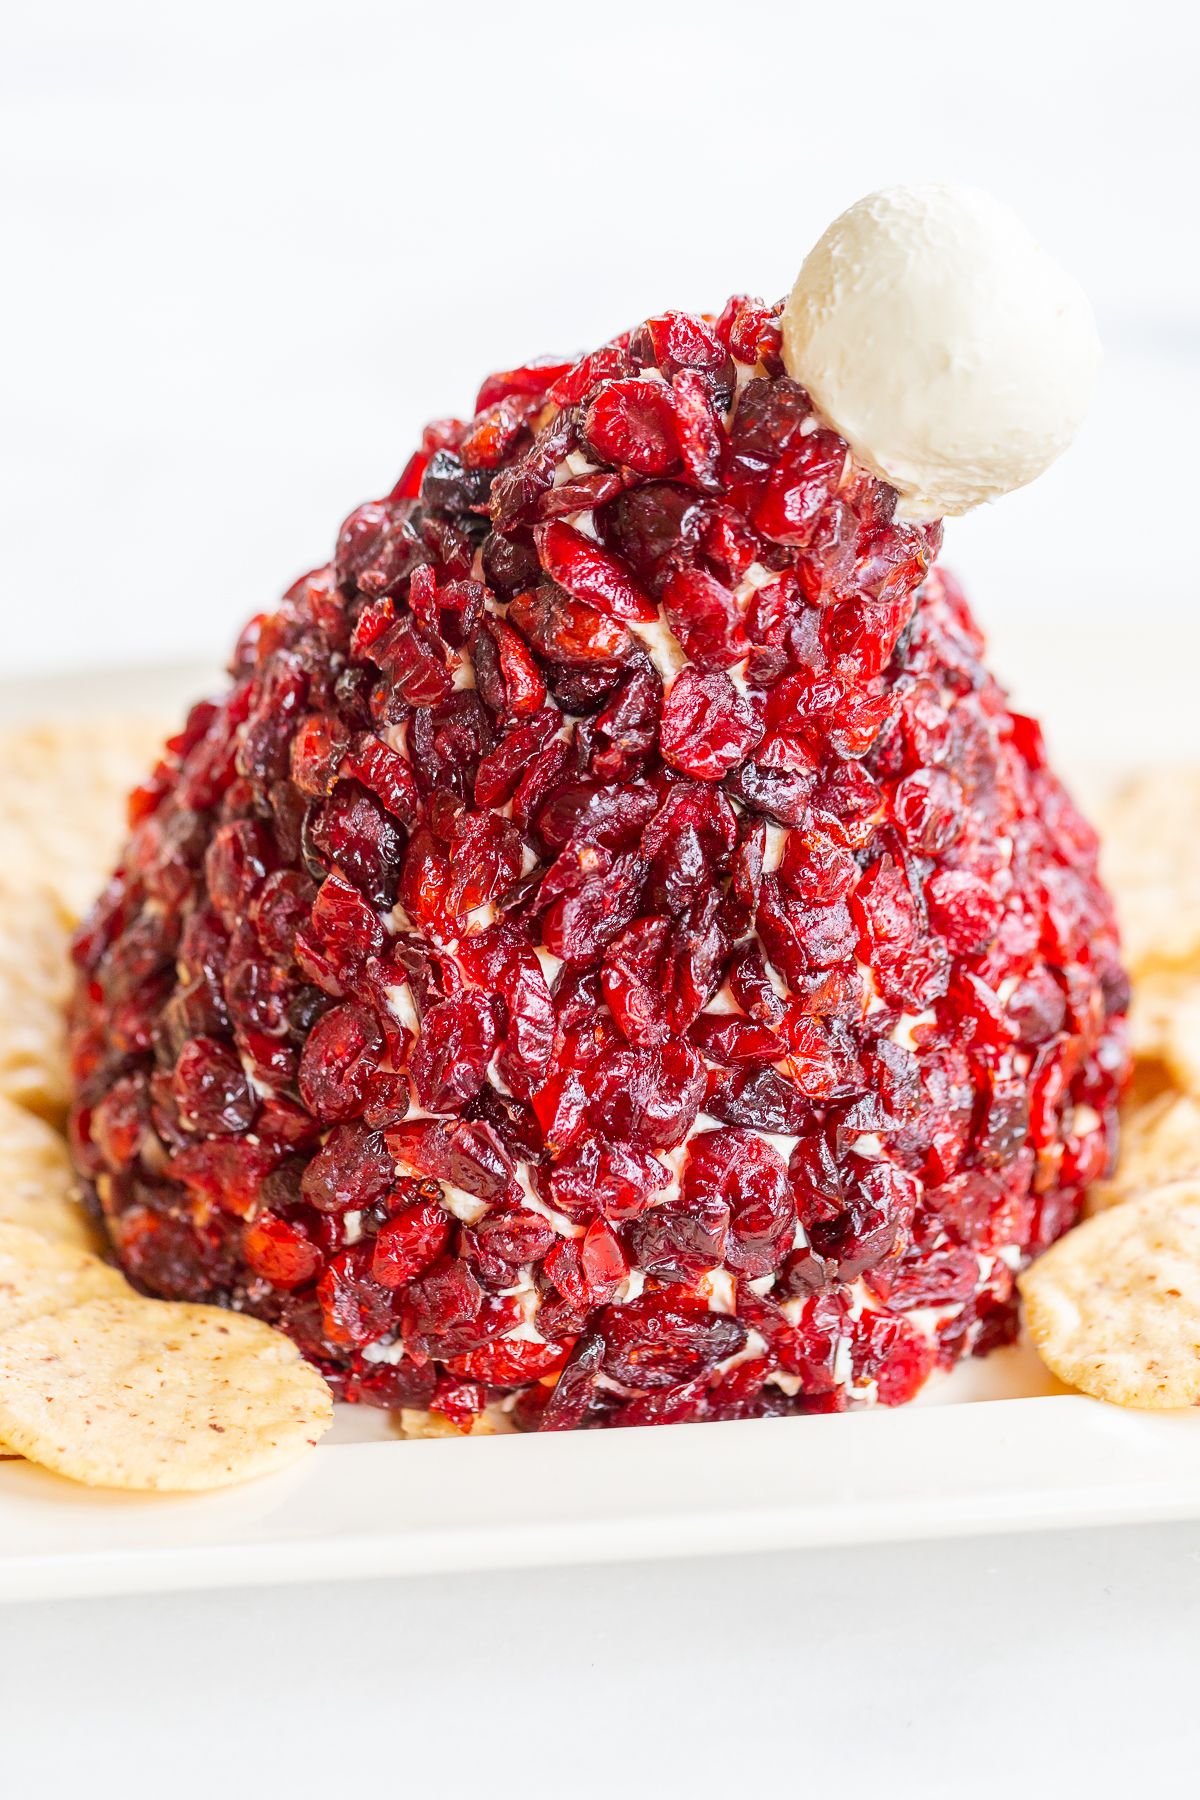 A cranberry cheeseball in the shape of a Santa's hat, on a plate surrounded by crackers.